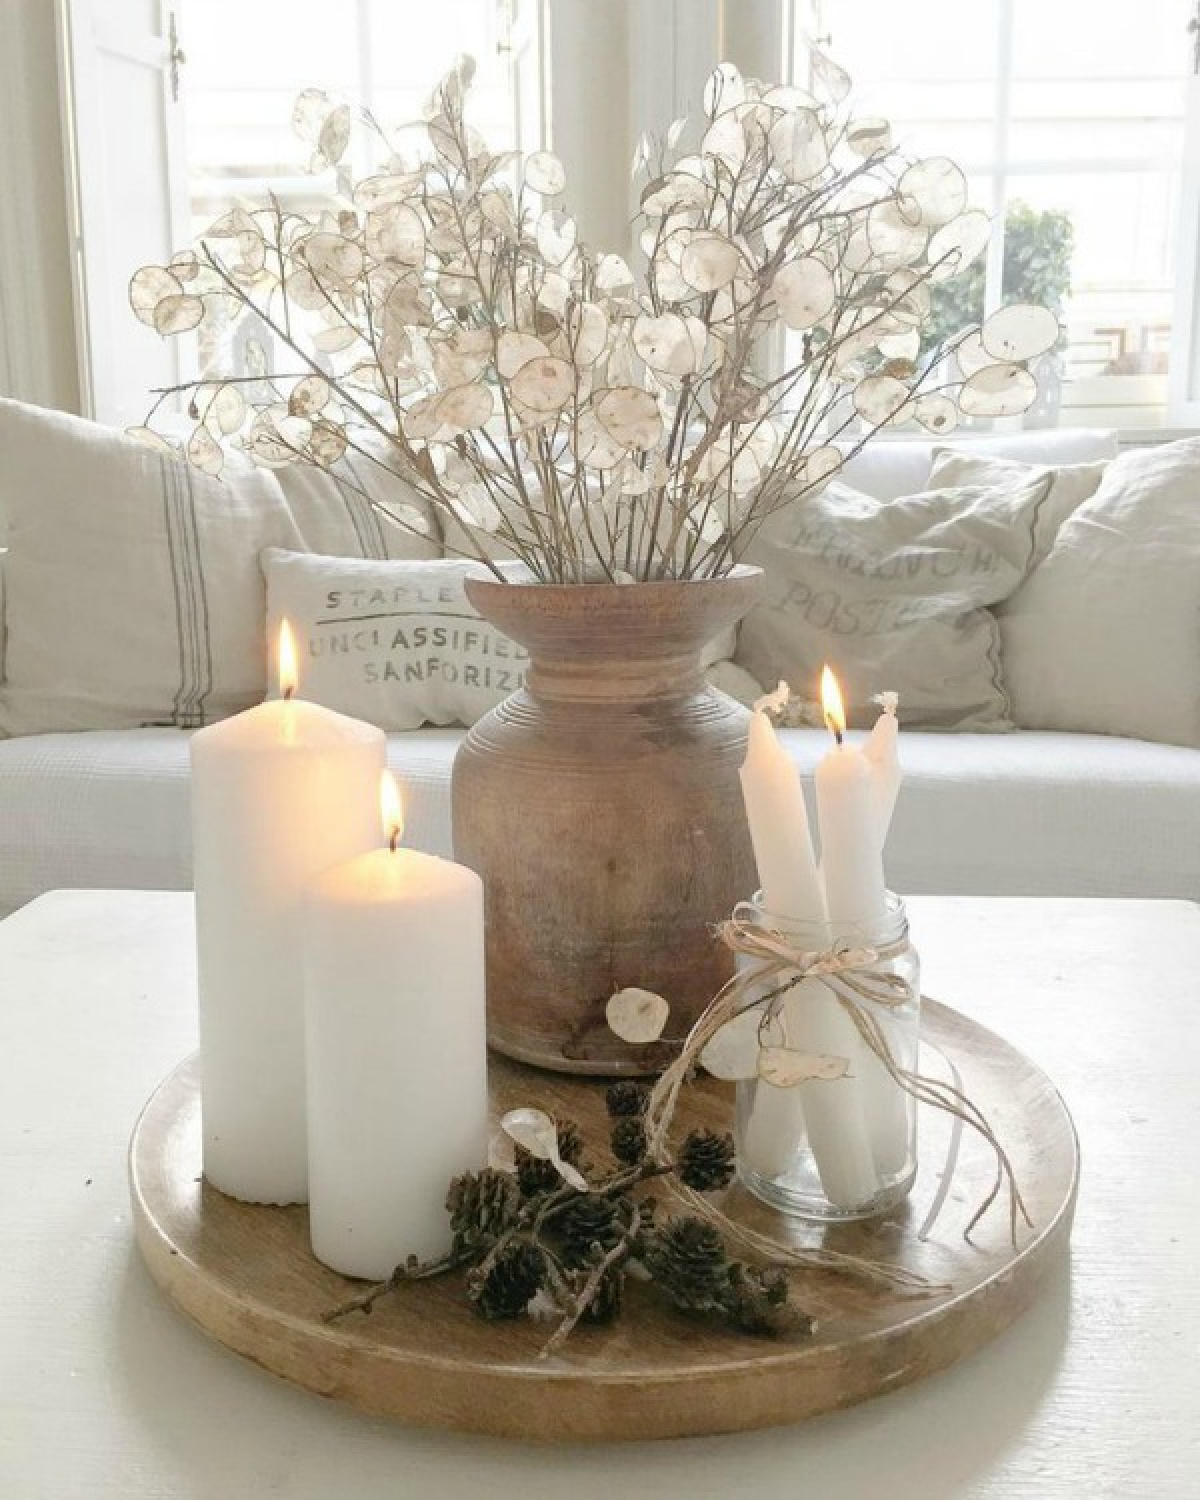 Serene and spare all white Scandi style living room with Mora clock and vignette with Lunaria on tray with candles - Villa Jenal. #frenchnordicstyle #nordicfrench #livingroom #swedishdecor #moraclock #interiordesign